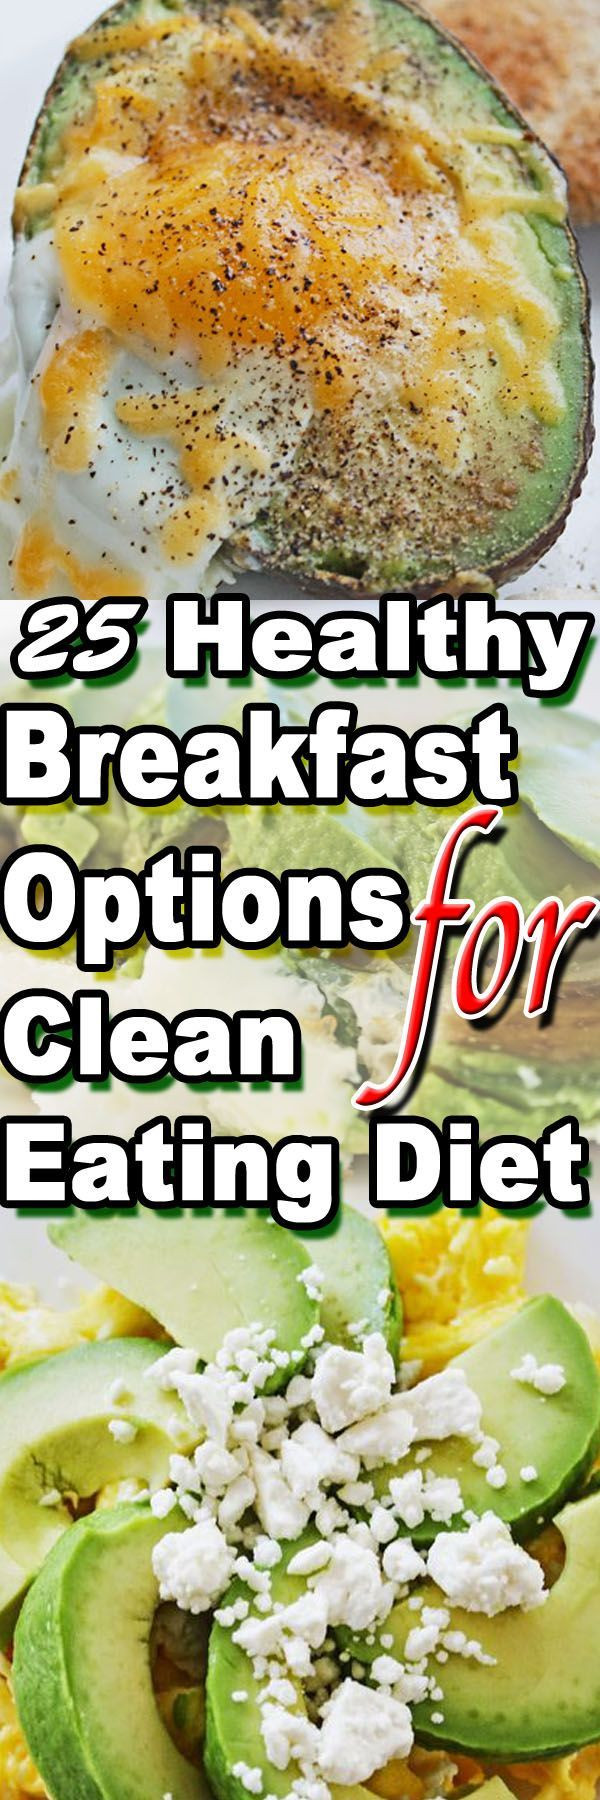 Healthy Recipes For Teenage Weight Loss
 Best 25 Teen t plan ideas on Pinterest